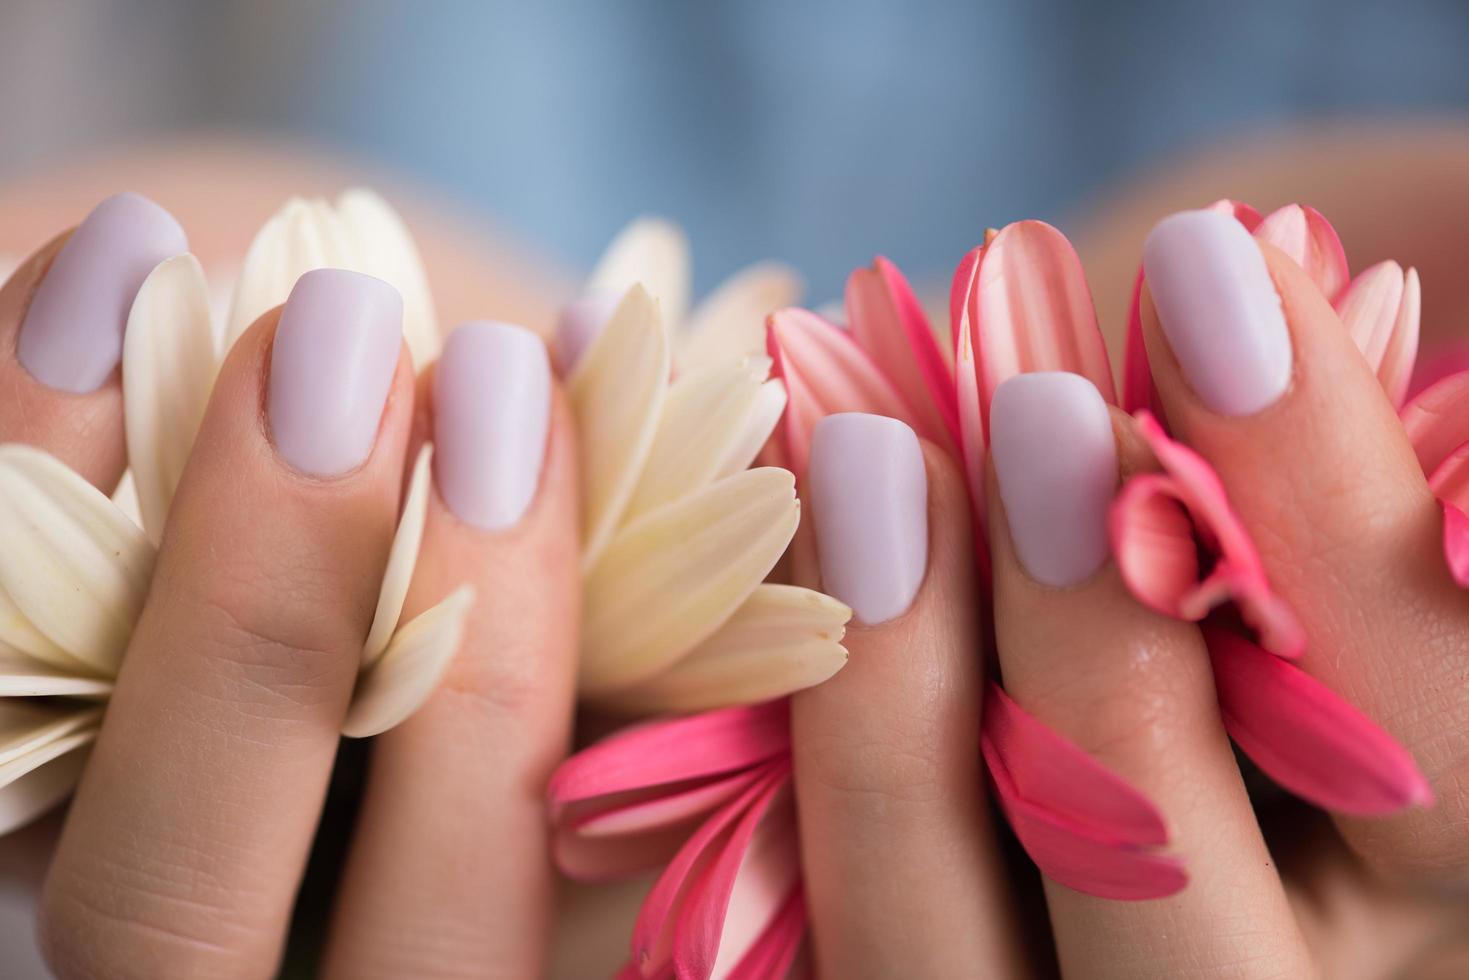 woman hands with manicure holding flower photo